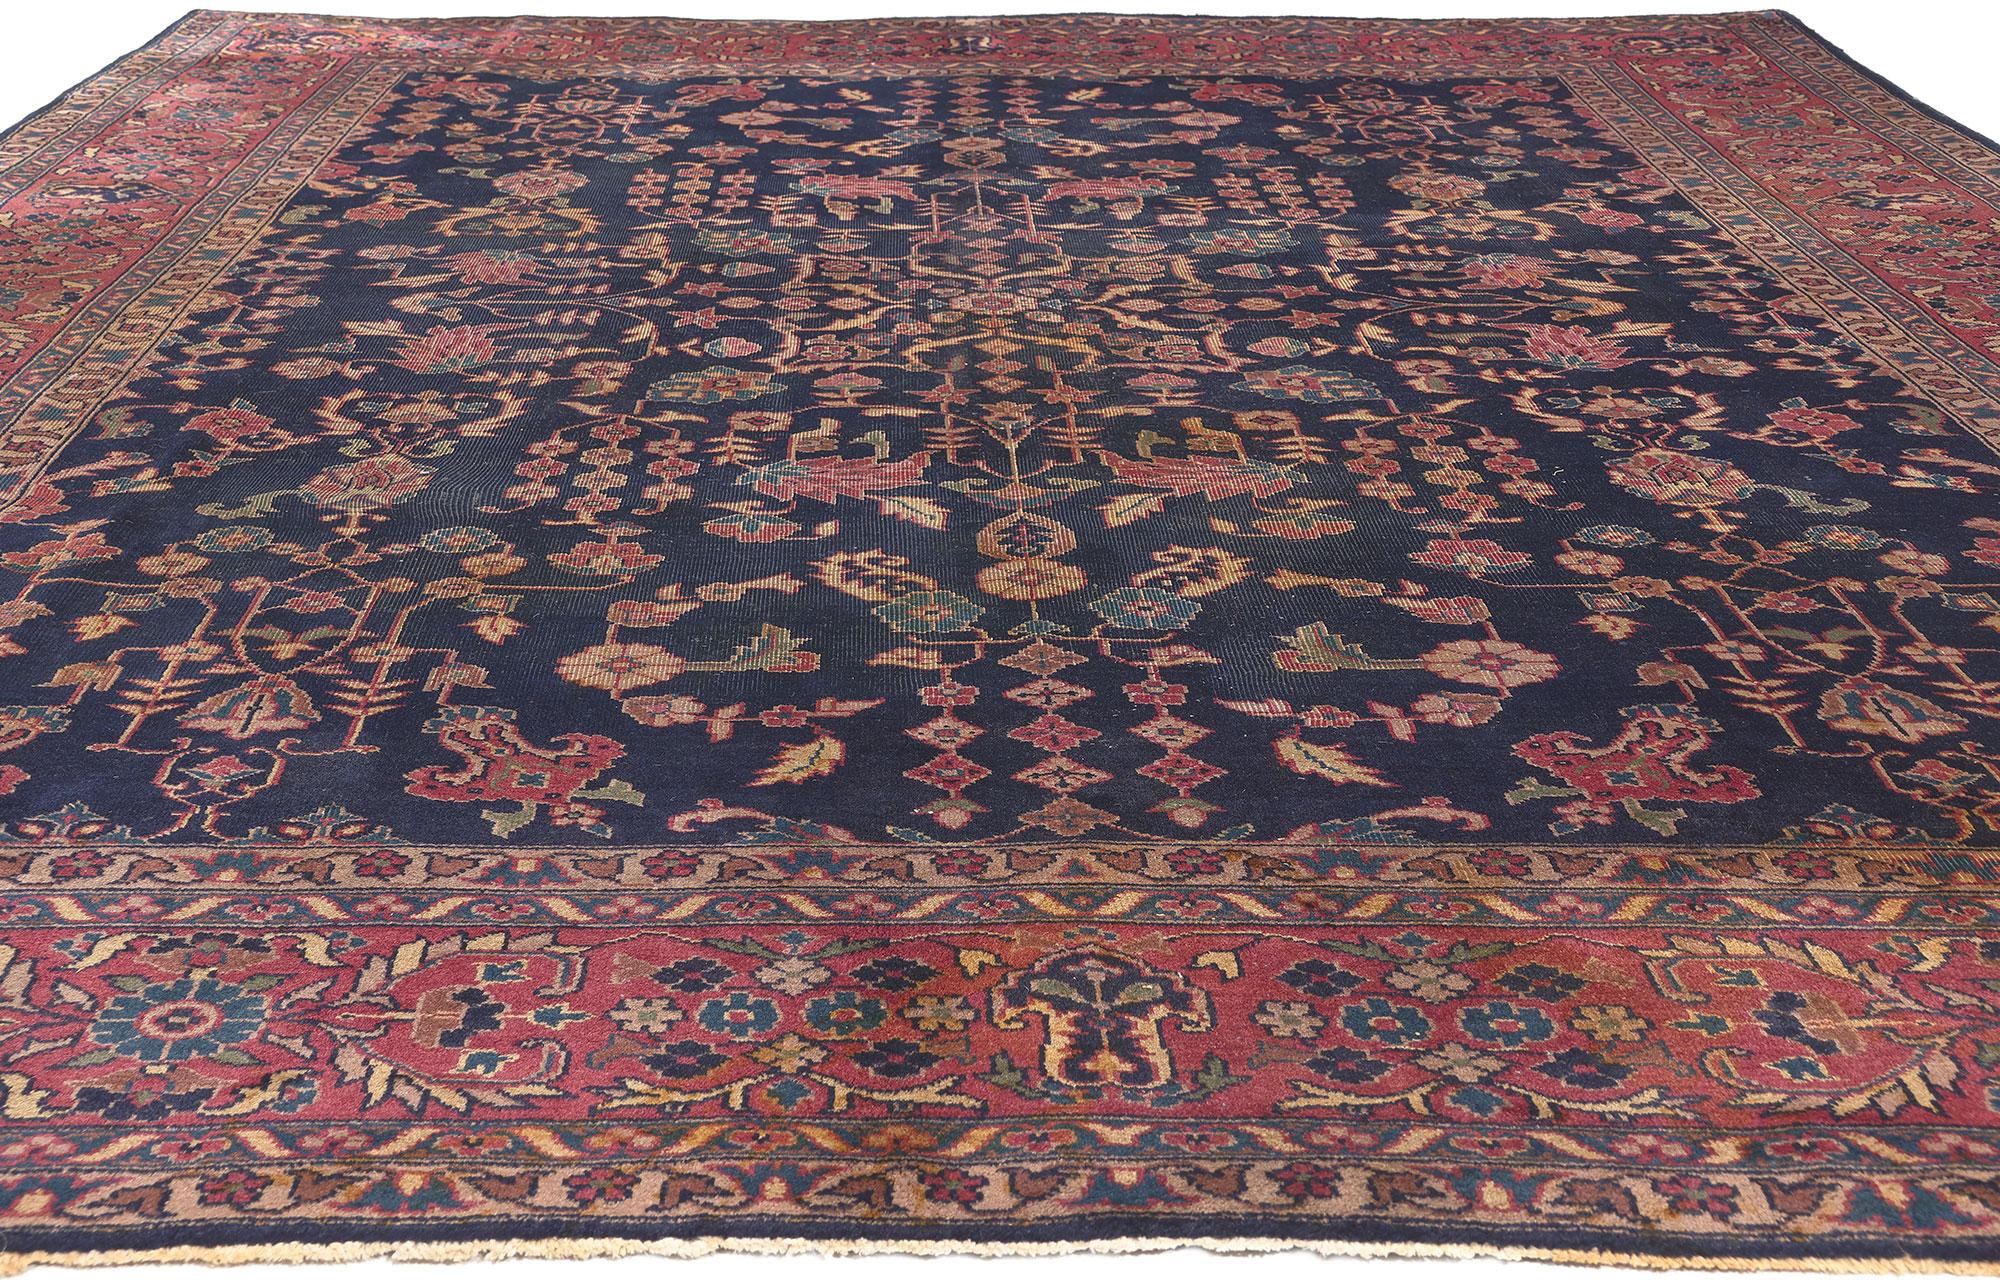 Rustic Antique Turkish Sparta Rug, Sophisticated Chic Meets Traditional Sensibility